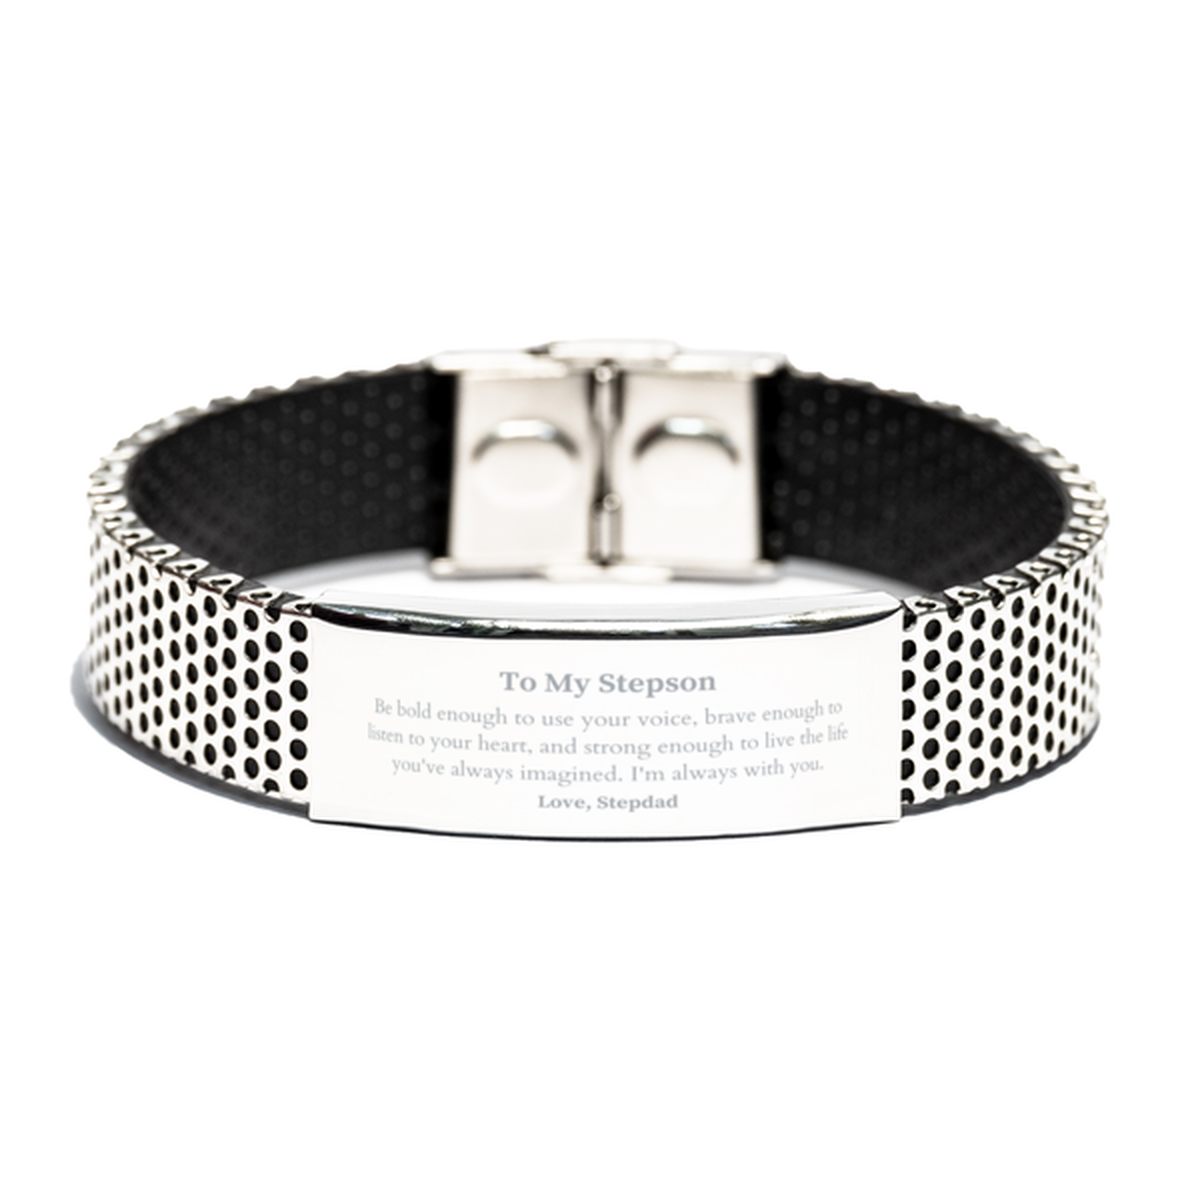 Keepsake Stepson Stainless Steel Bracelet Gift Idea Graduation Christmas Birthday Stepson from Stepdad, Stepson Be bold enough to use your voice, brave enough to listen to your heart. Love, Stepdad